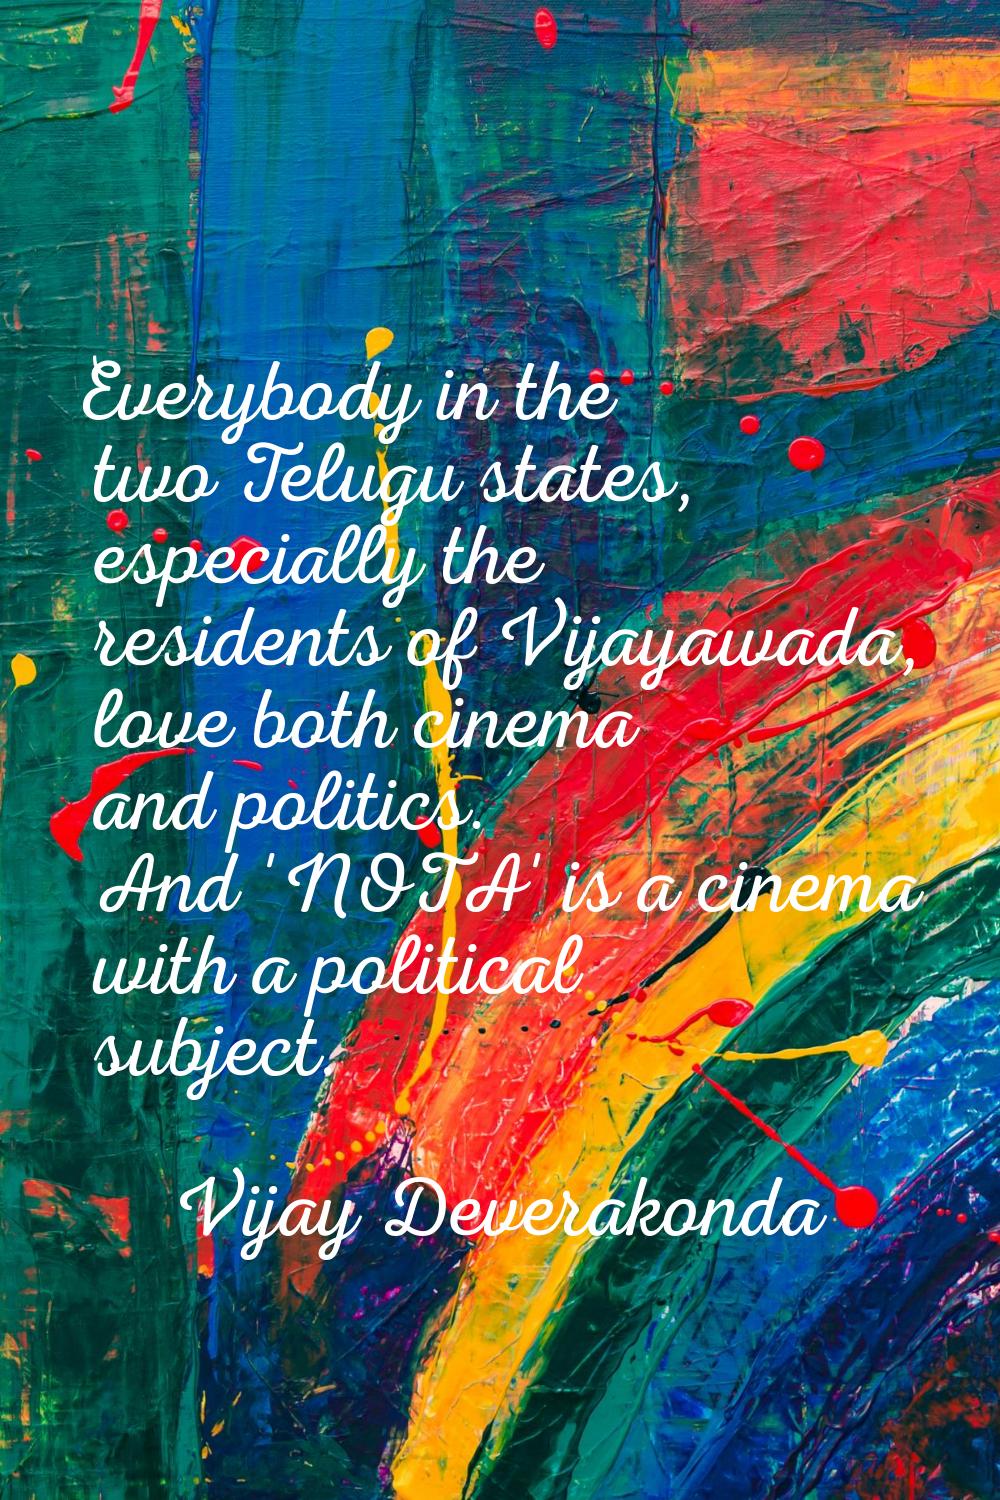 Everybody in the two Telugu states, especially the residents of Vijayawada, love both cinema and po